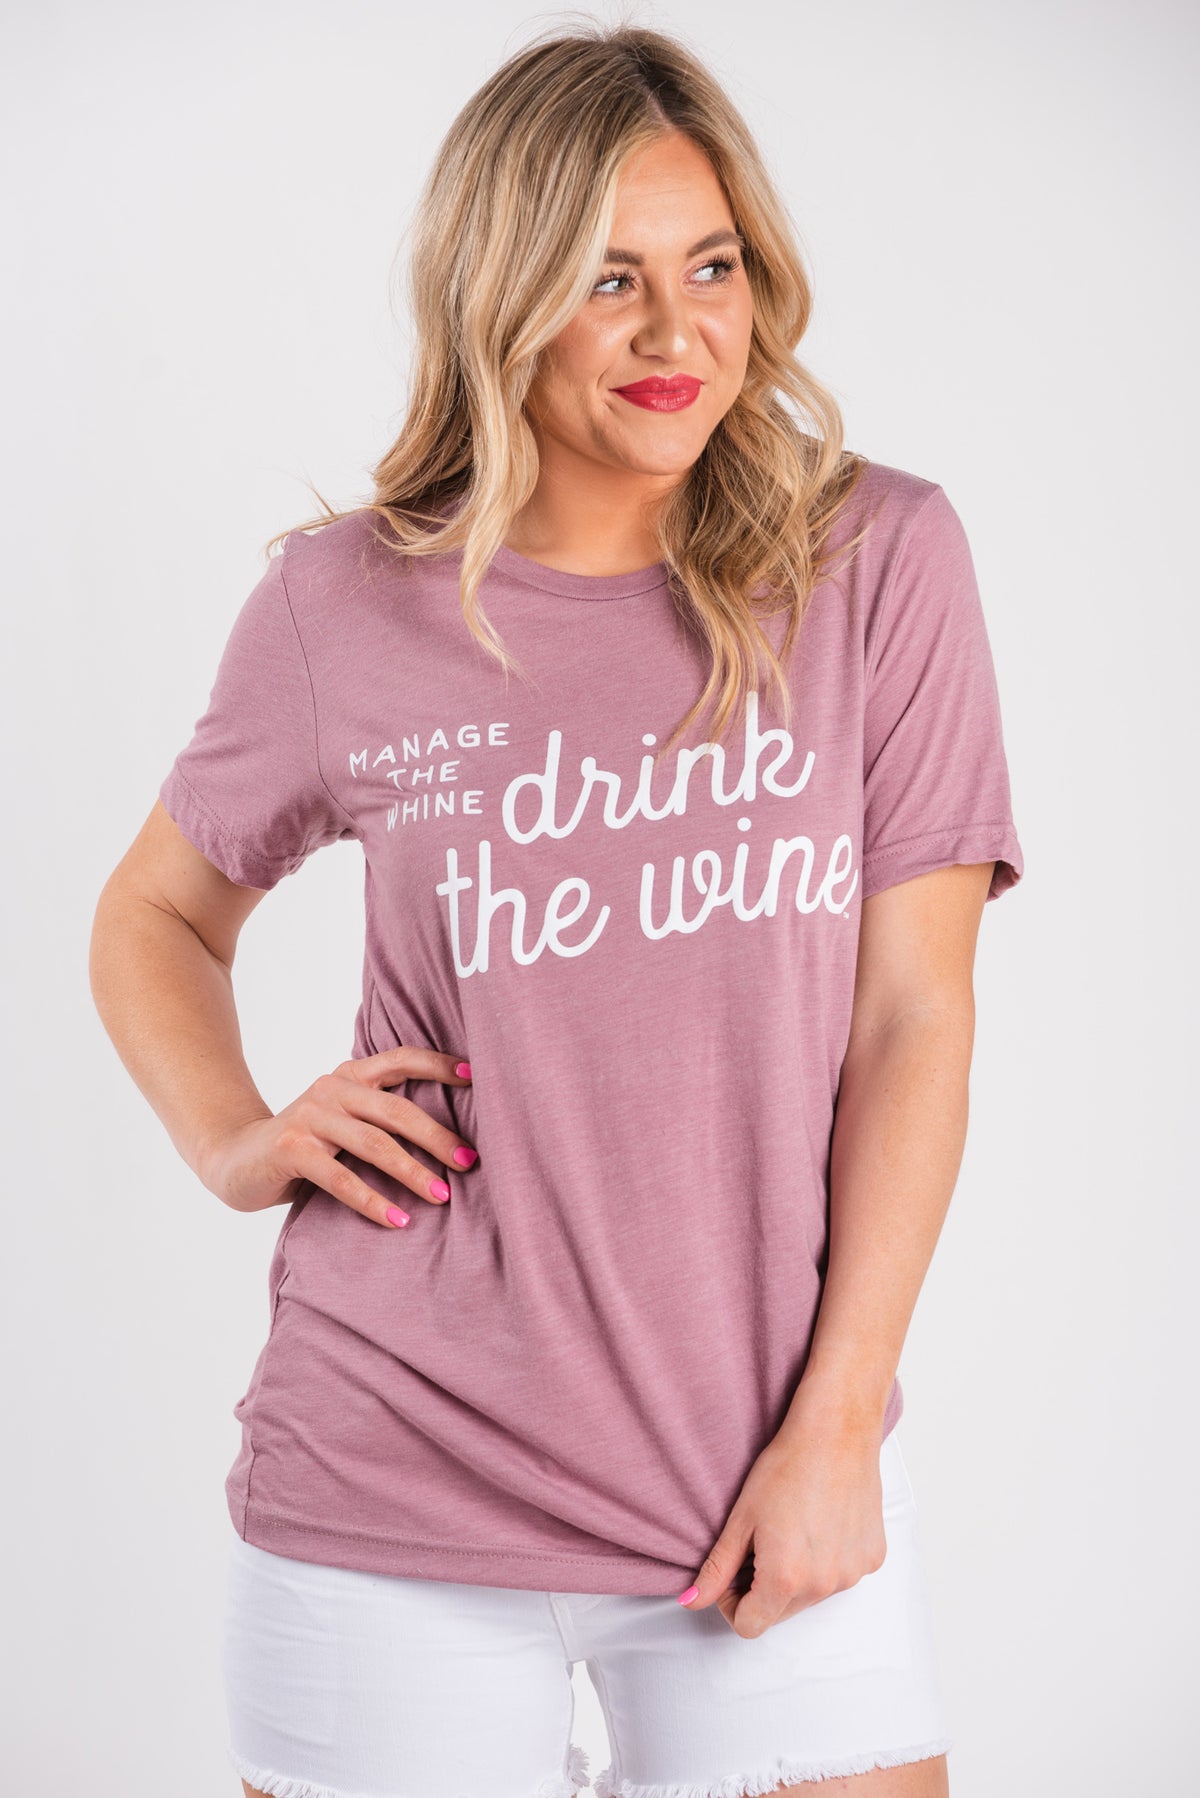 Manage the whine, drink the wine unisex short sleeve t-shirt orchid - Stylish T-shirts - Trendy Graphic T-Shirts and Tank Tops at Lush Fashion Lounge Boutique in Oklahoma City